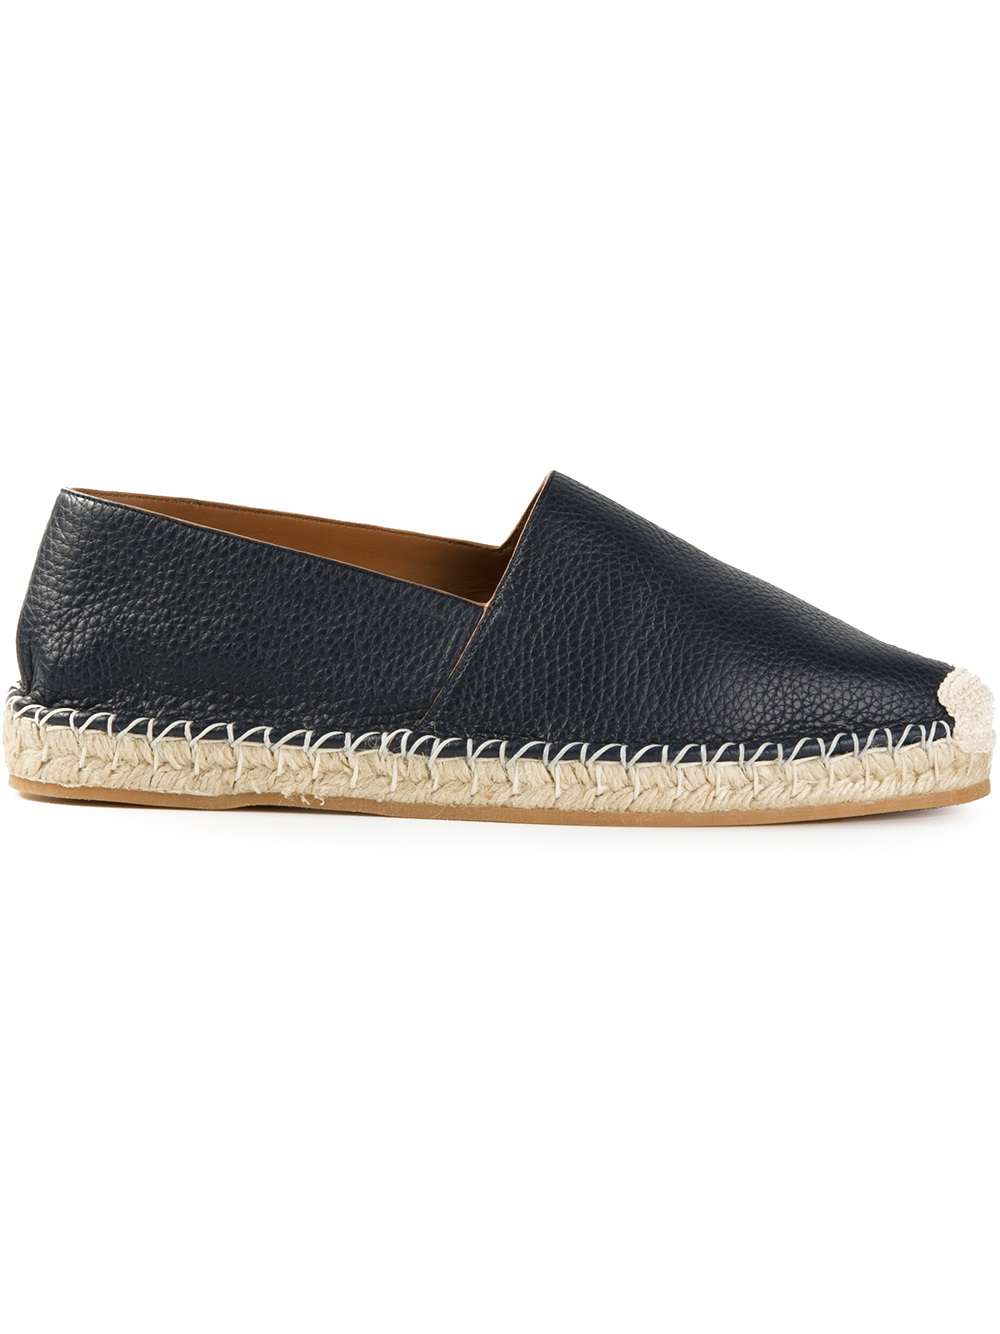 Lyst - Valentino Leather Espadrille in Blue for Men